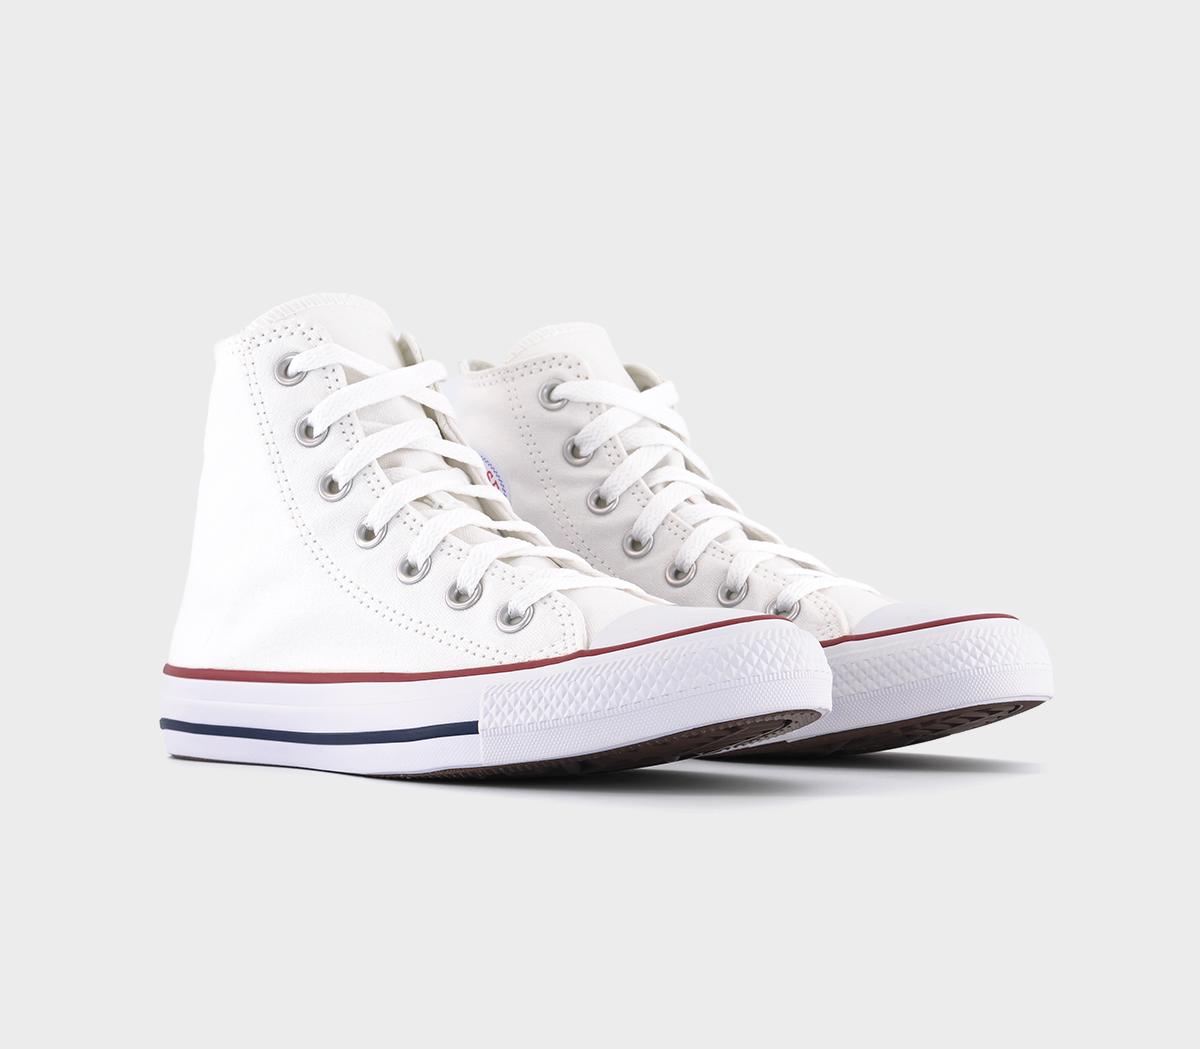 Converse White All Star High Optical Trainers, 7